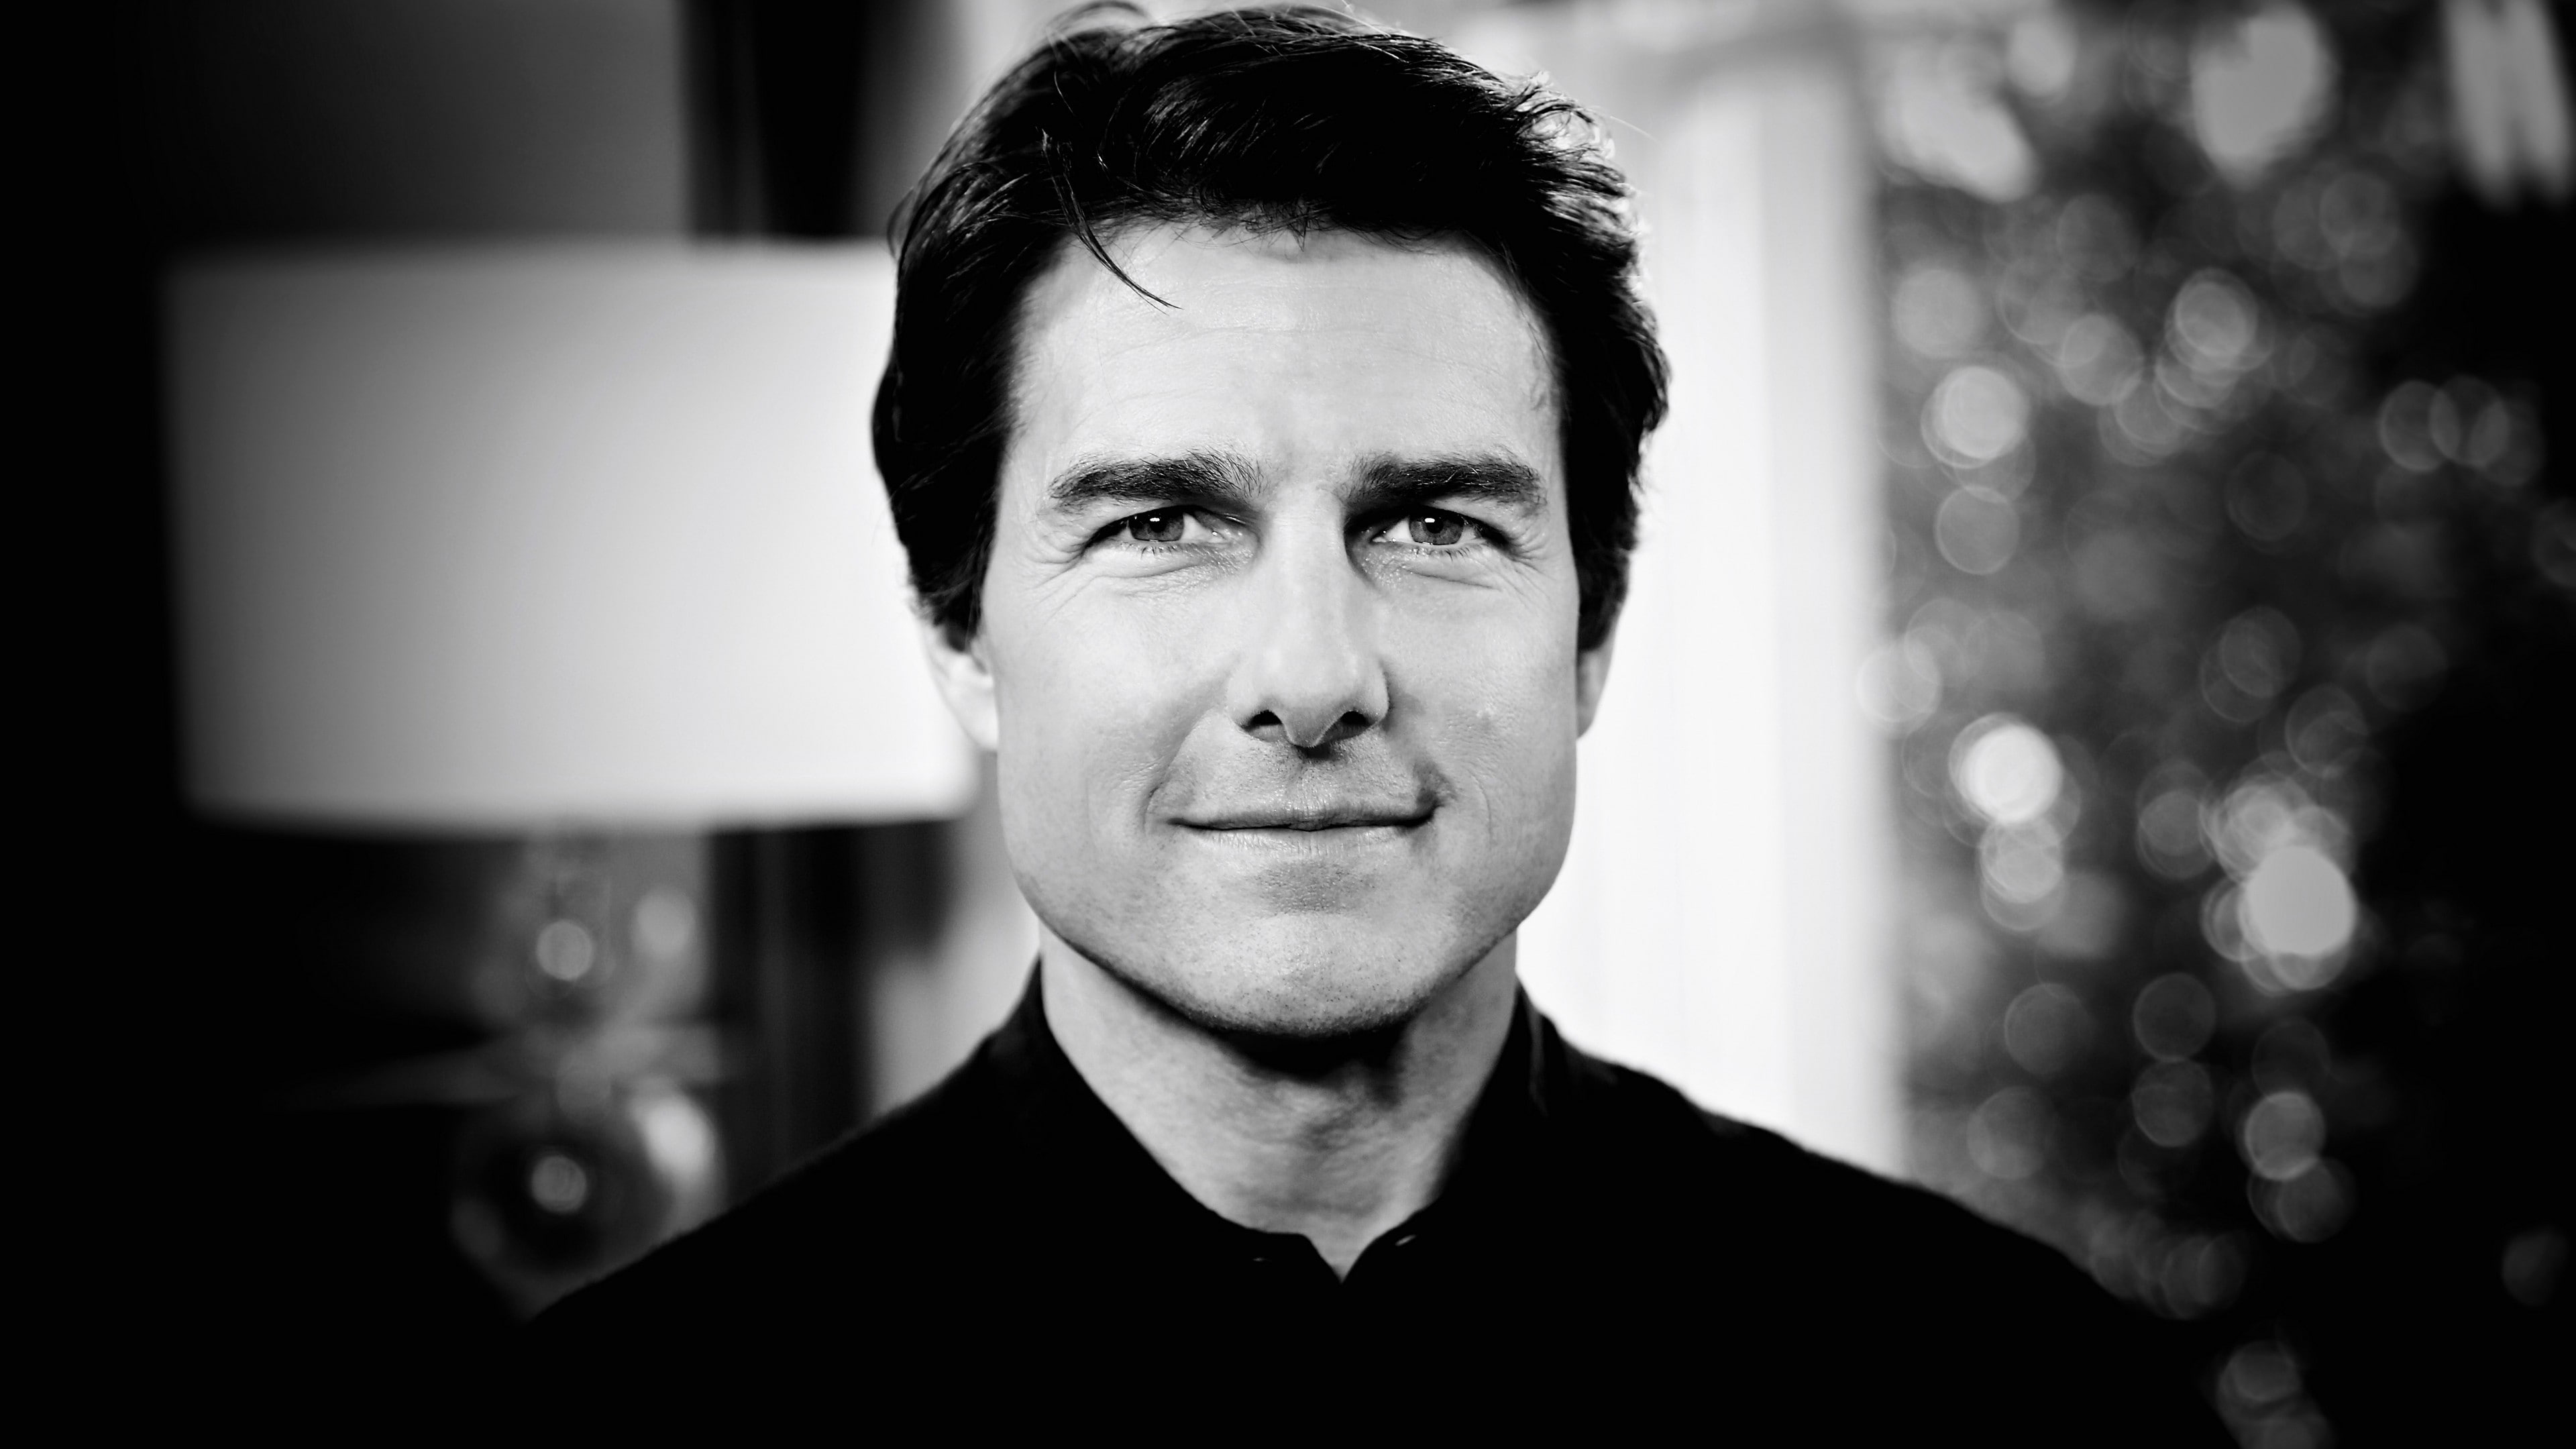 men, Tom Cruise, actor, headshot, portrait, one person, front view